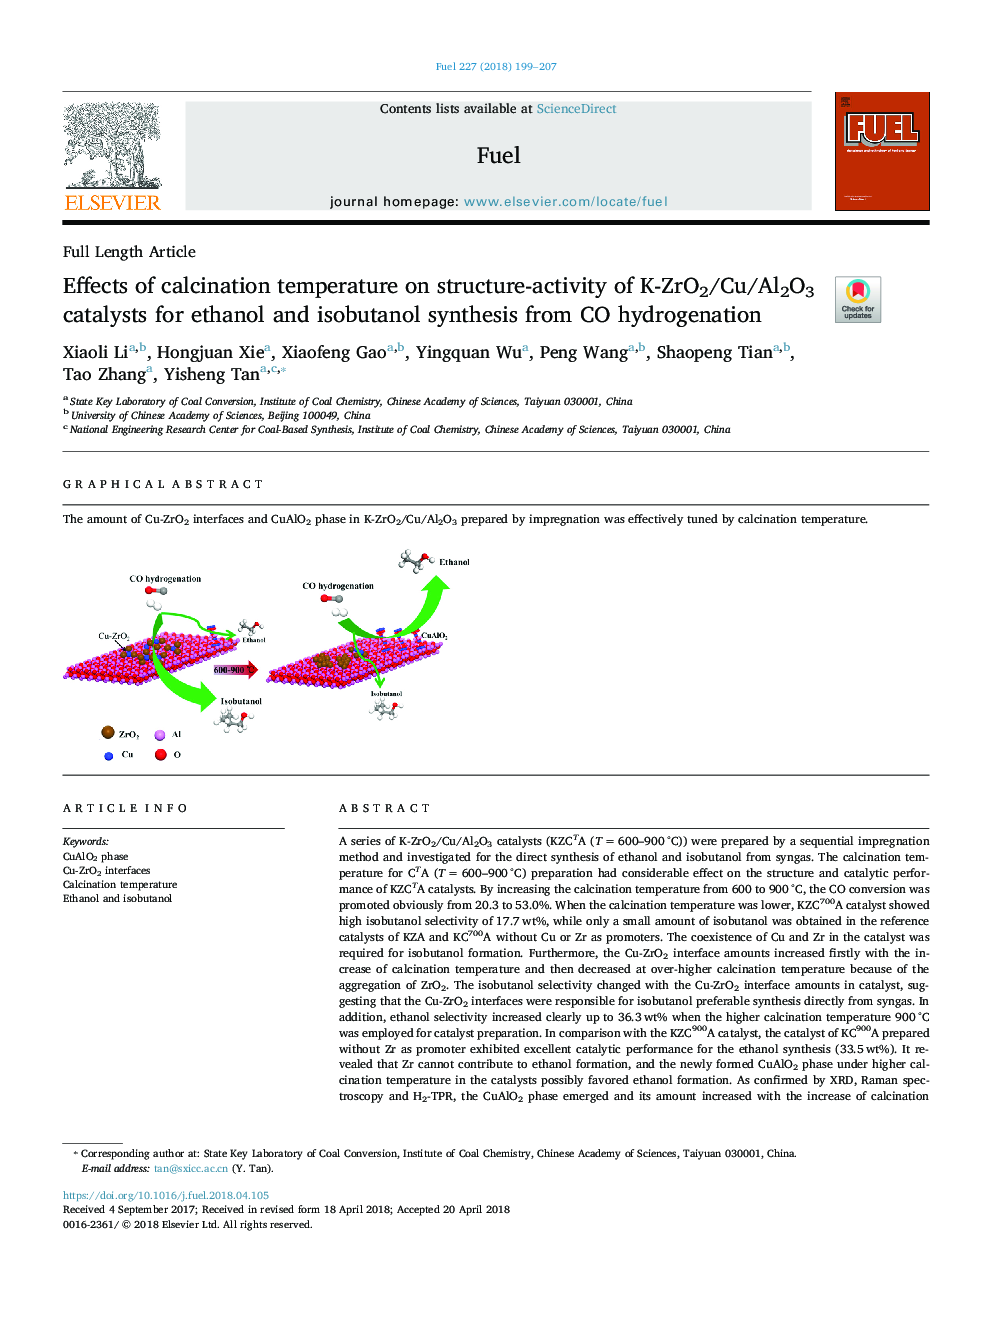 Effects of calcination temperature on structure-activity of K-ZrO2/Cu/Al2O3 catalysts for ethanol and isobutanol synthesis from CO hydrogenation